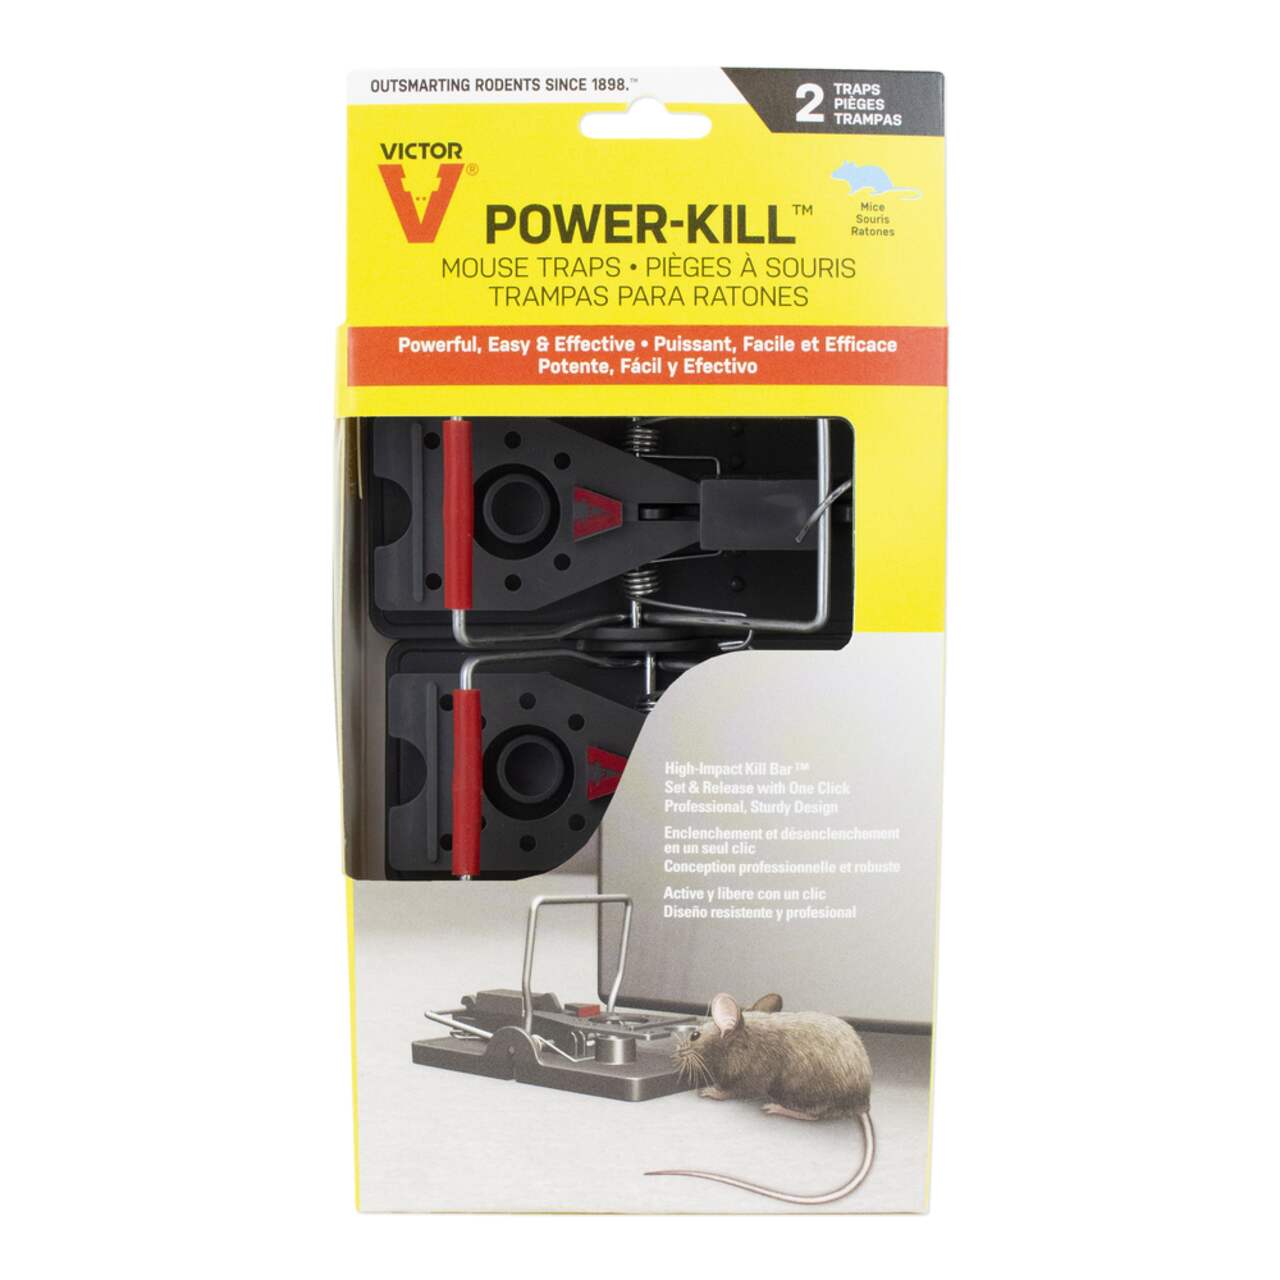 https://media-www.canadiantire.ca/product/seasonal-gardening/gardening/weed-insect-rodent-control/0590866/victor-power-kill-mouse-trap-2-pack-4b2fea4d-397c-4216-a9cc-e9d02280b7e7.png?imdensity=1&imwidth=1244&impolicy=mZoom